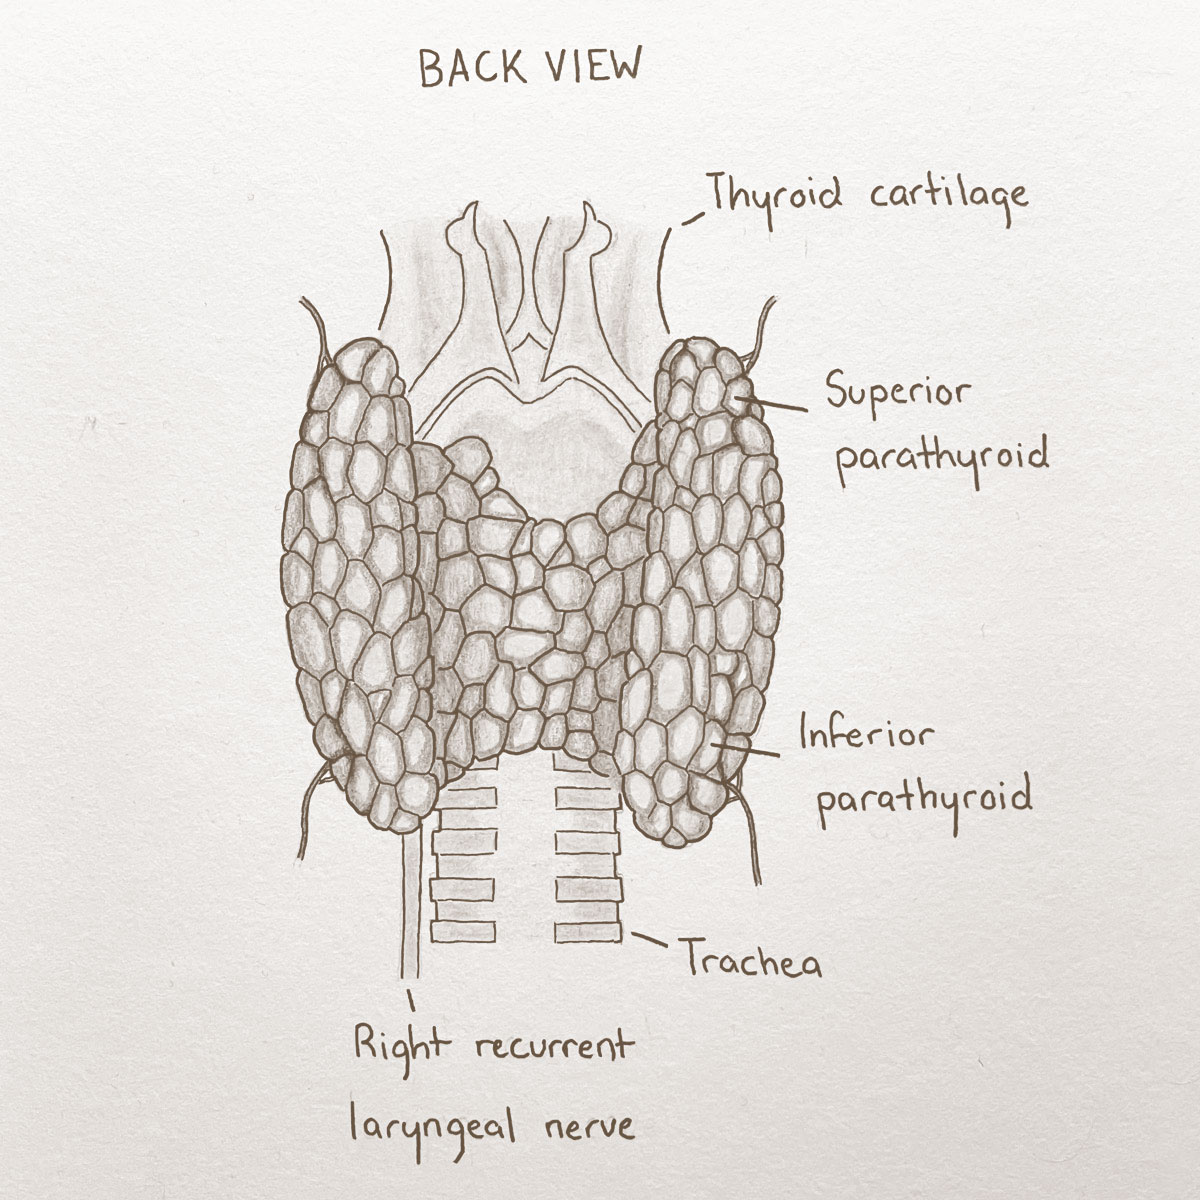 Sepia anatomical illustration back view of thyroid